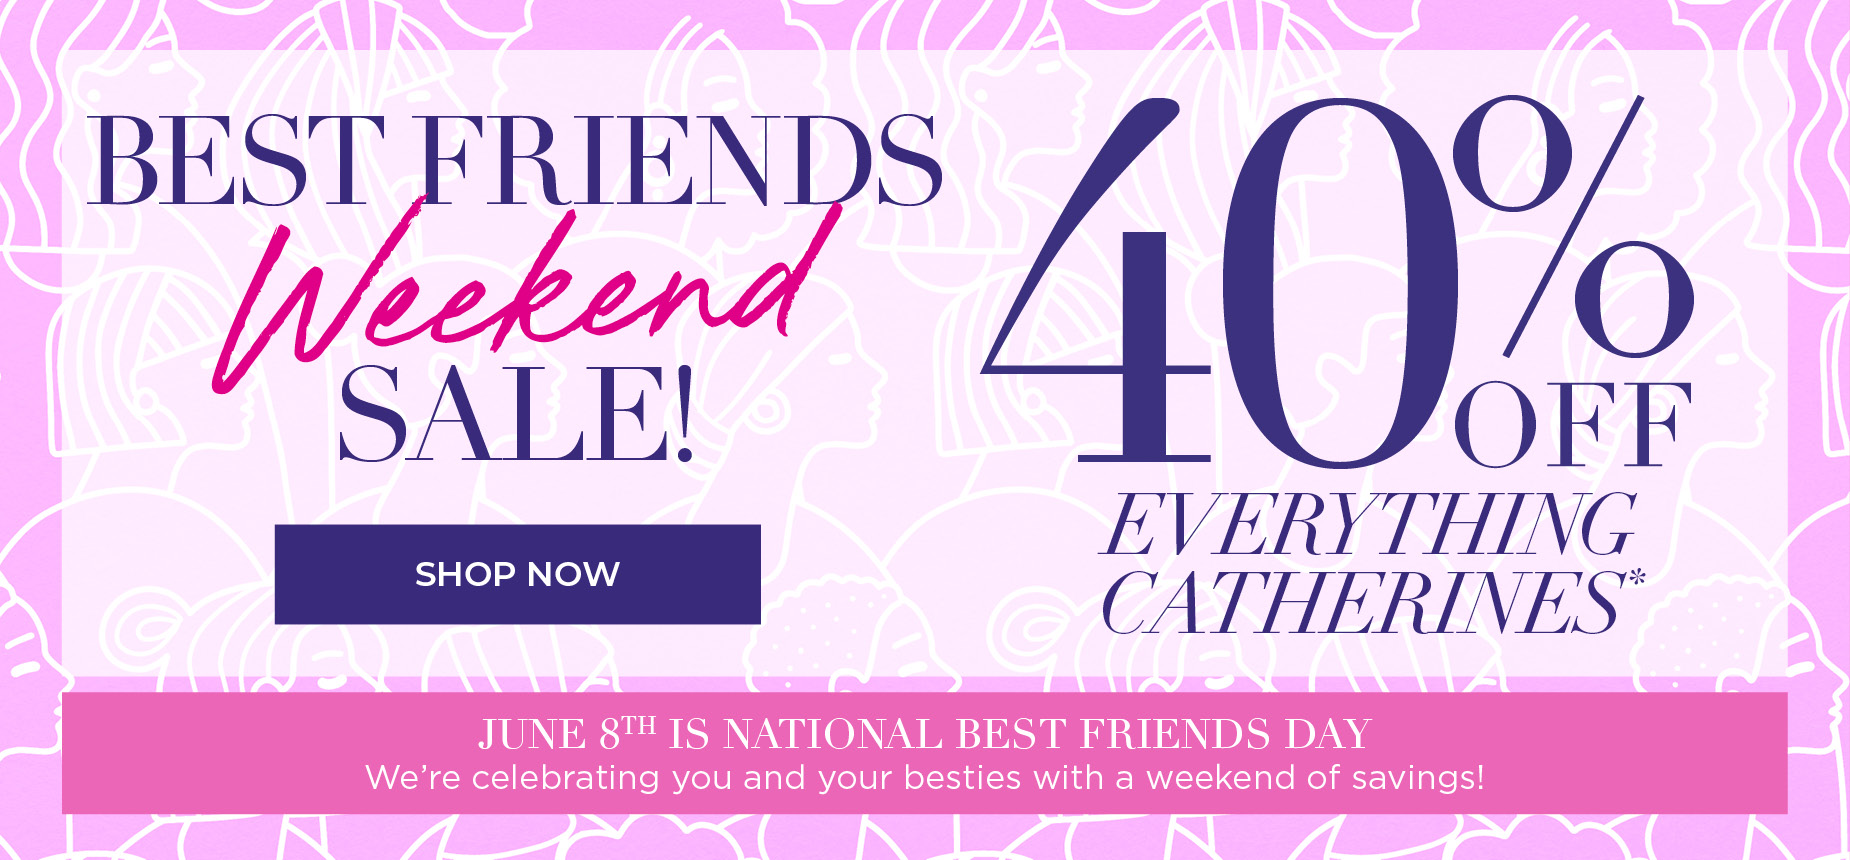 BEST FIRENDS WEEKEND SALE! 40% OFF EVERYTHING CATHERINES*